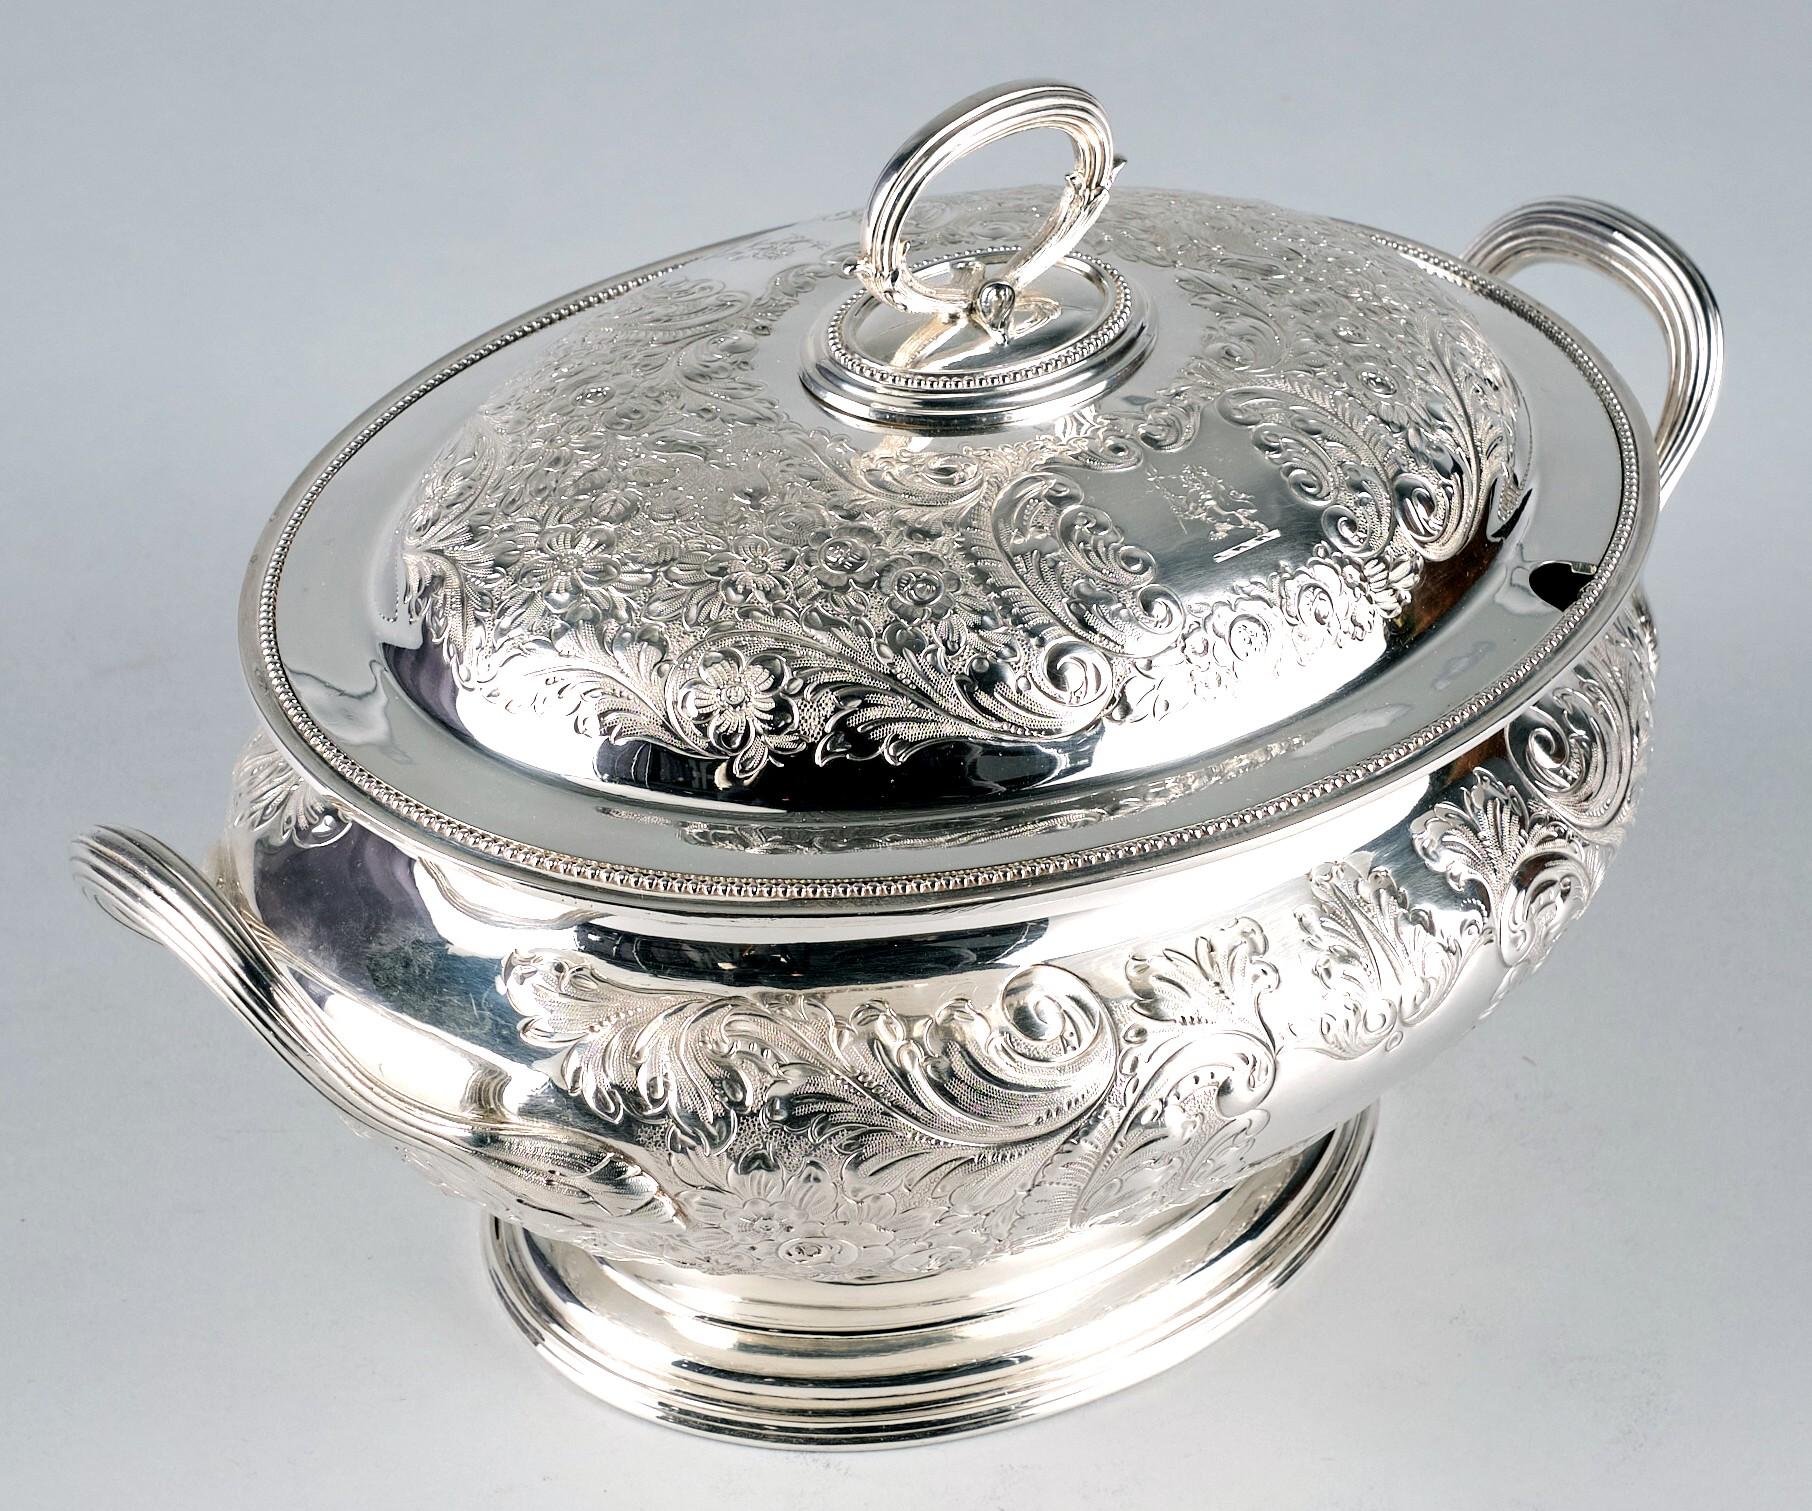 Victorian A Very Fine 19th Century Silver Plated Lidded Soup Tureen by Elkington & Company For Sale